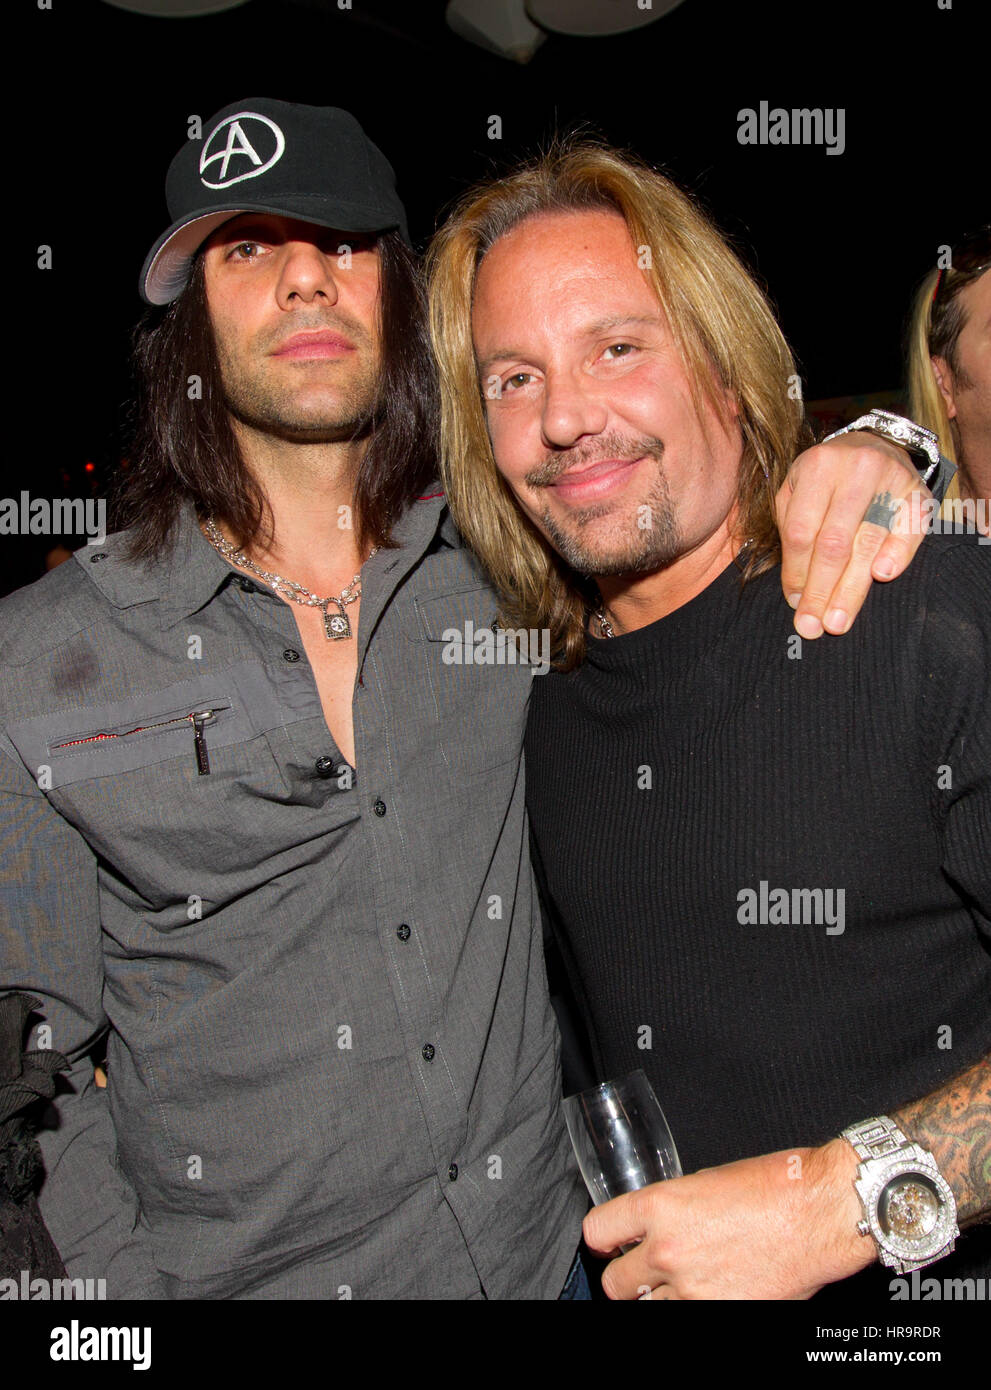 Criss Angel, and Vince Neil pictured at Robin Leach and Michael Boychuck Birthday party at Blush at The Wynn Las Vegas in Las Vegas, NV on September 10, 2010. Stock Photo